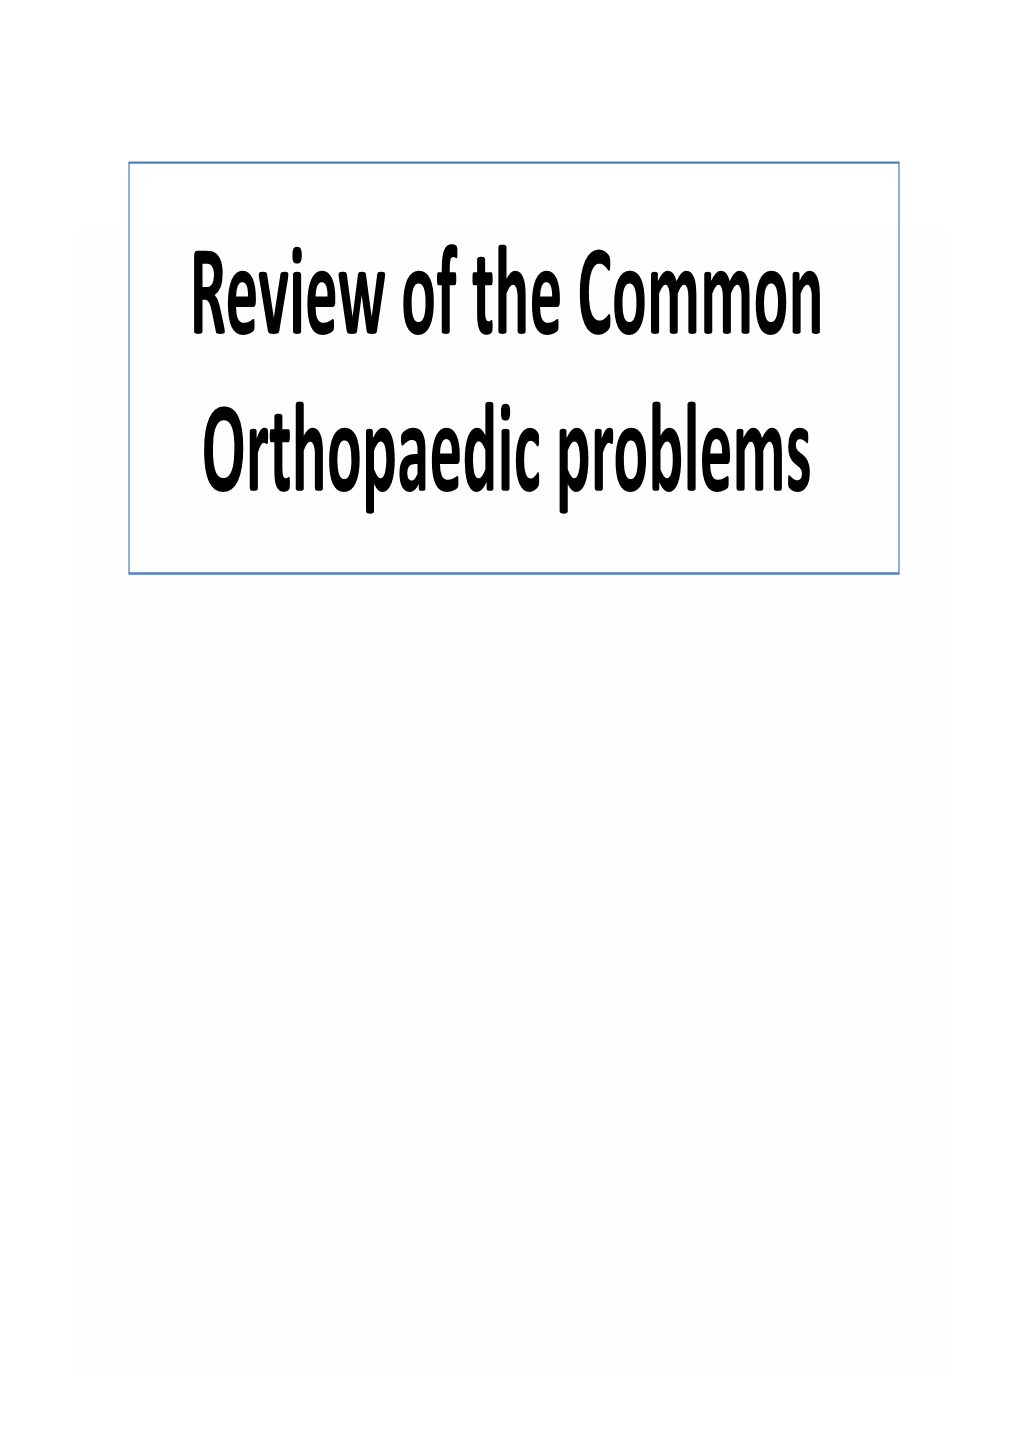 Review of the Common Orthopaedic Problems